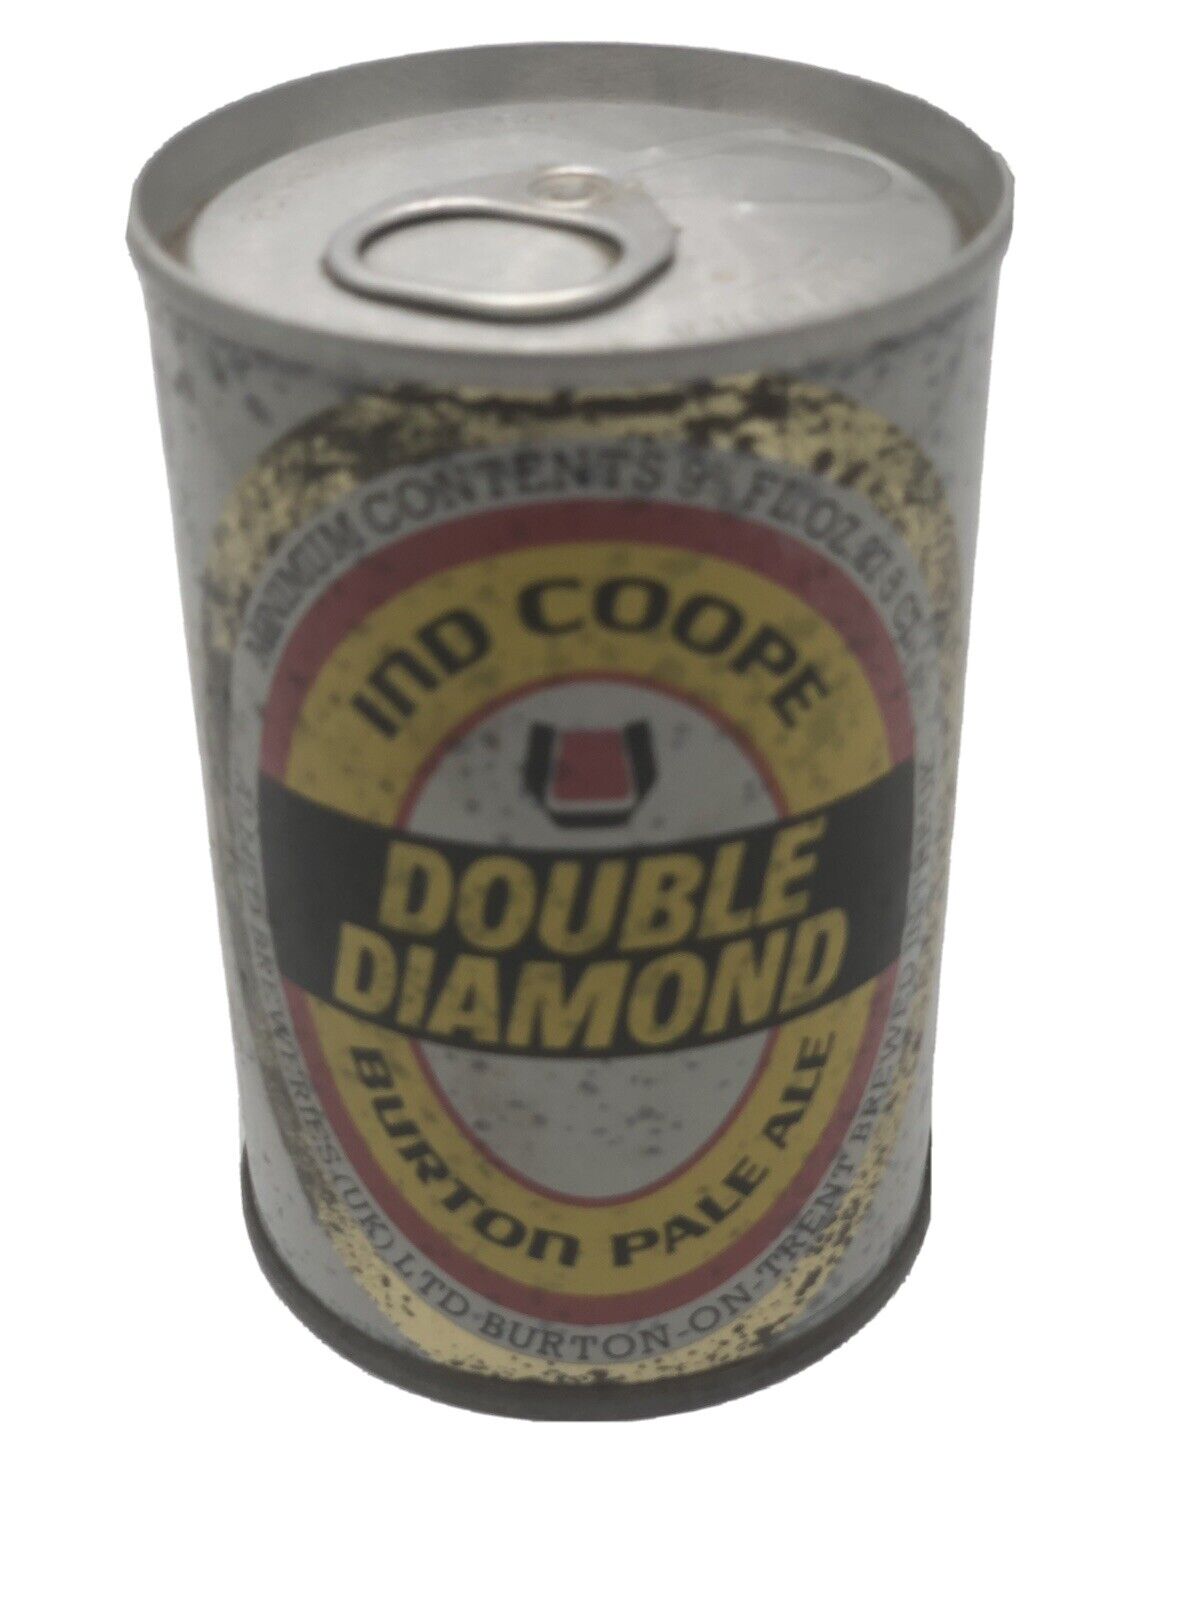 Rare IND COOPE DOUBLE DIAMOND CAN 9 2/3 BREWED IN LONDON